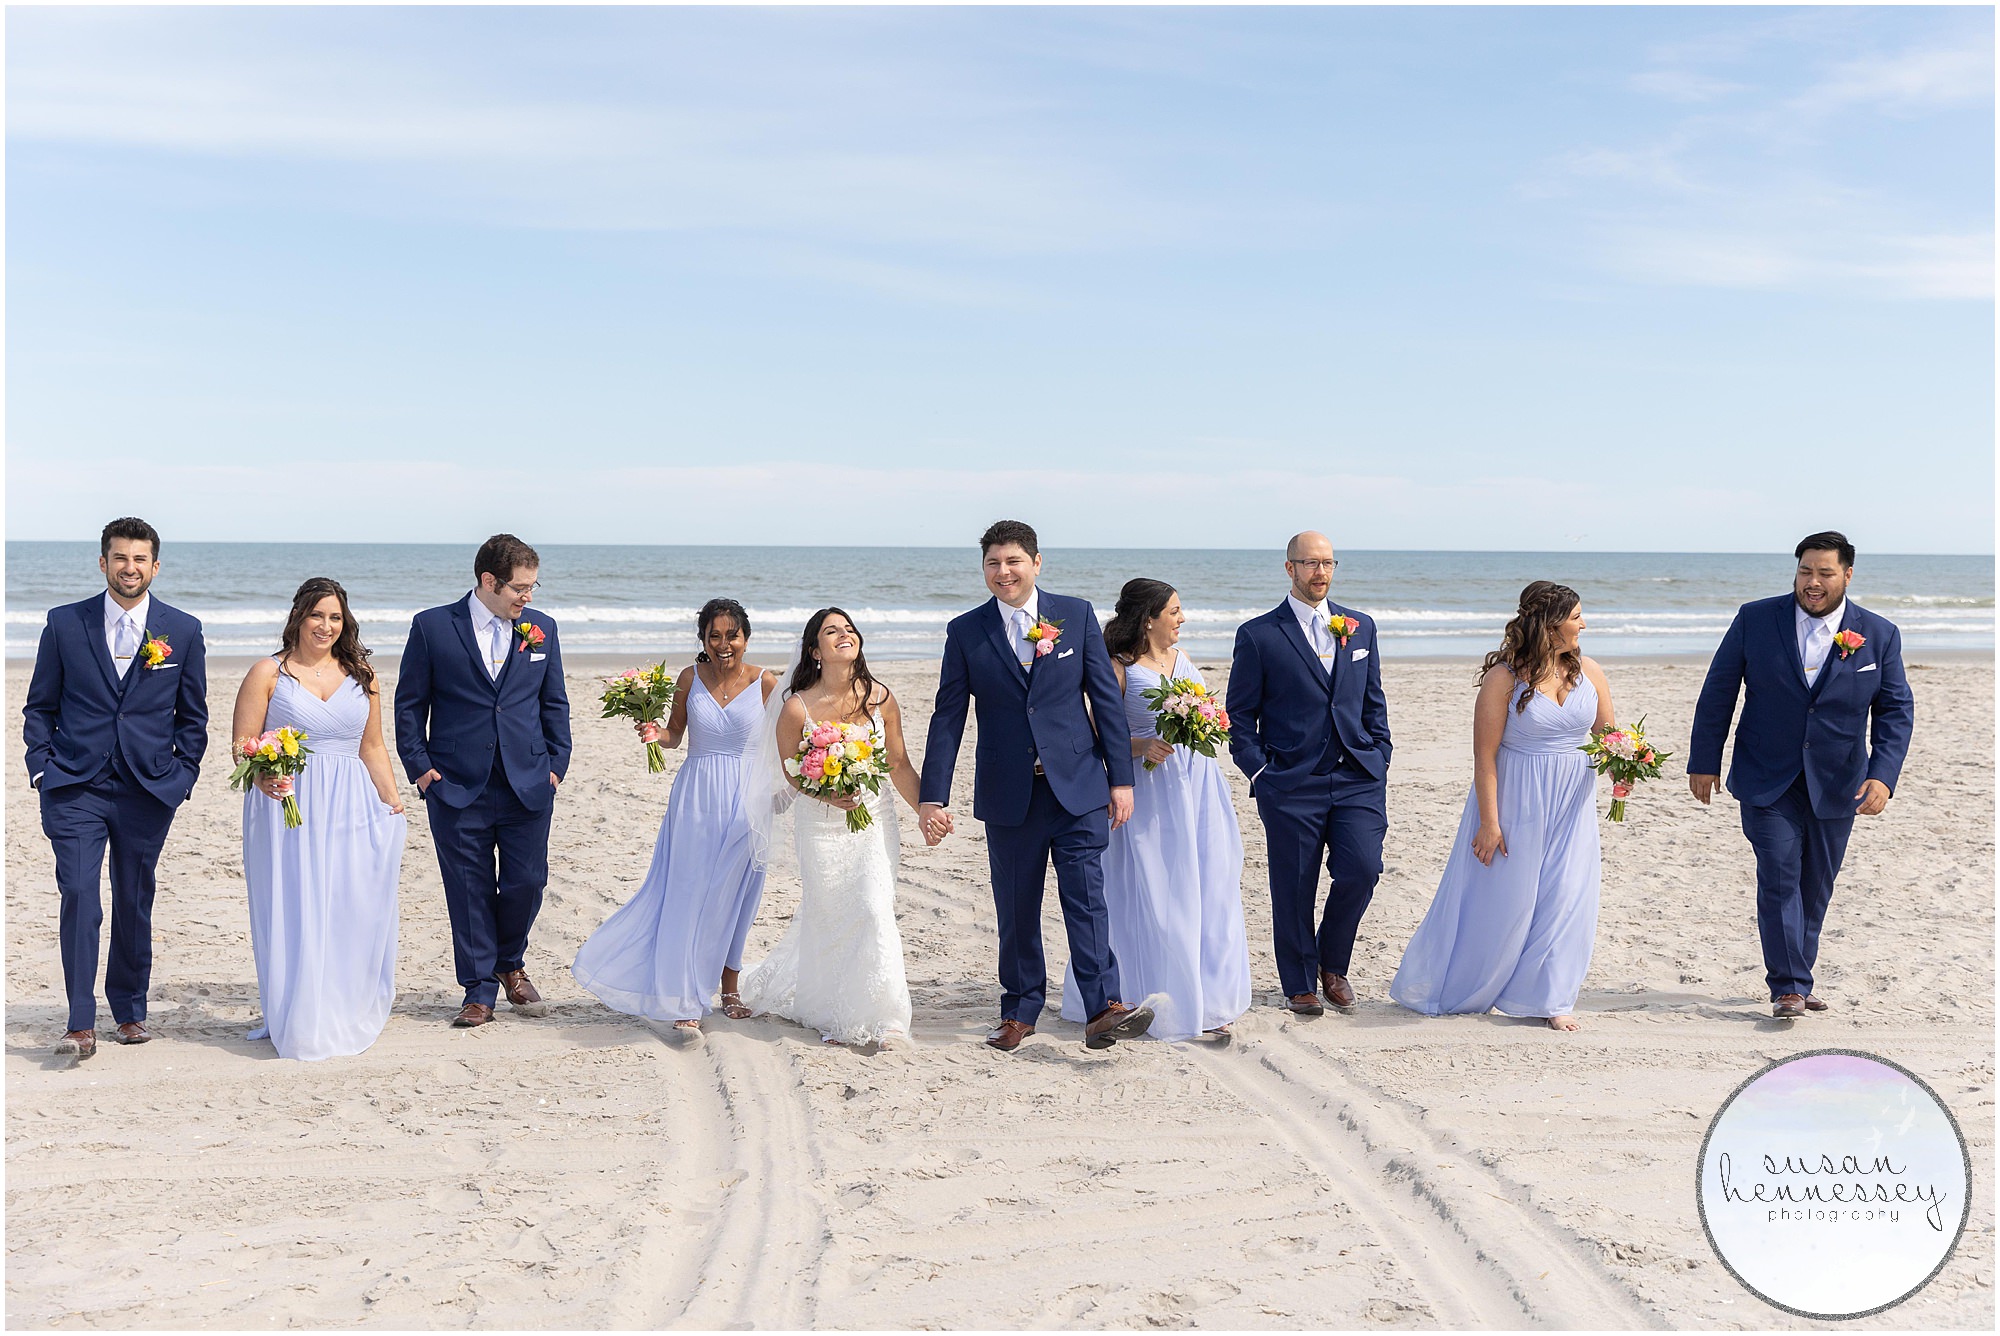 Bridal party walk on beach with ocean in the background at ICONA Avalon Wedding